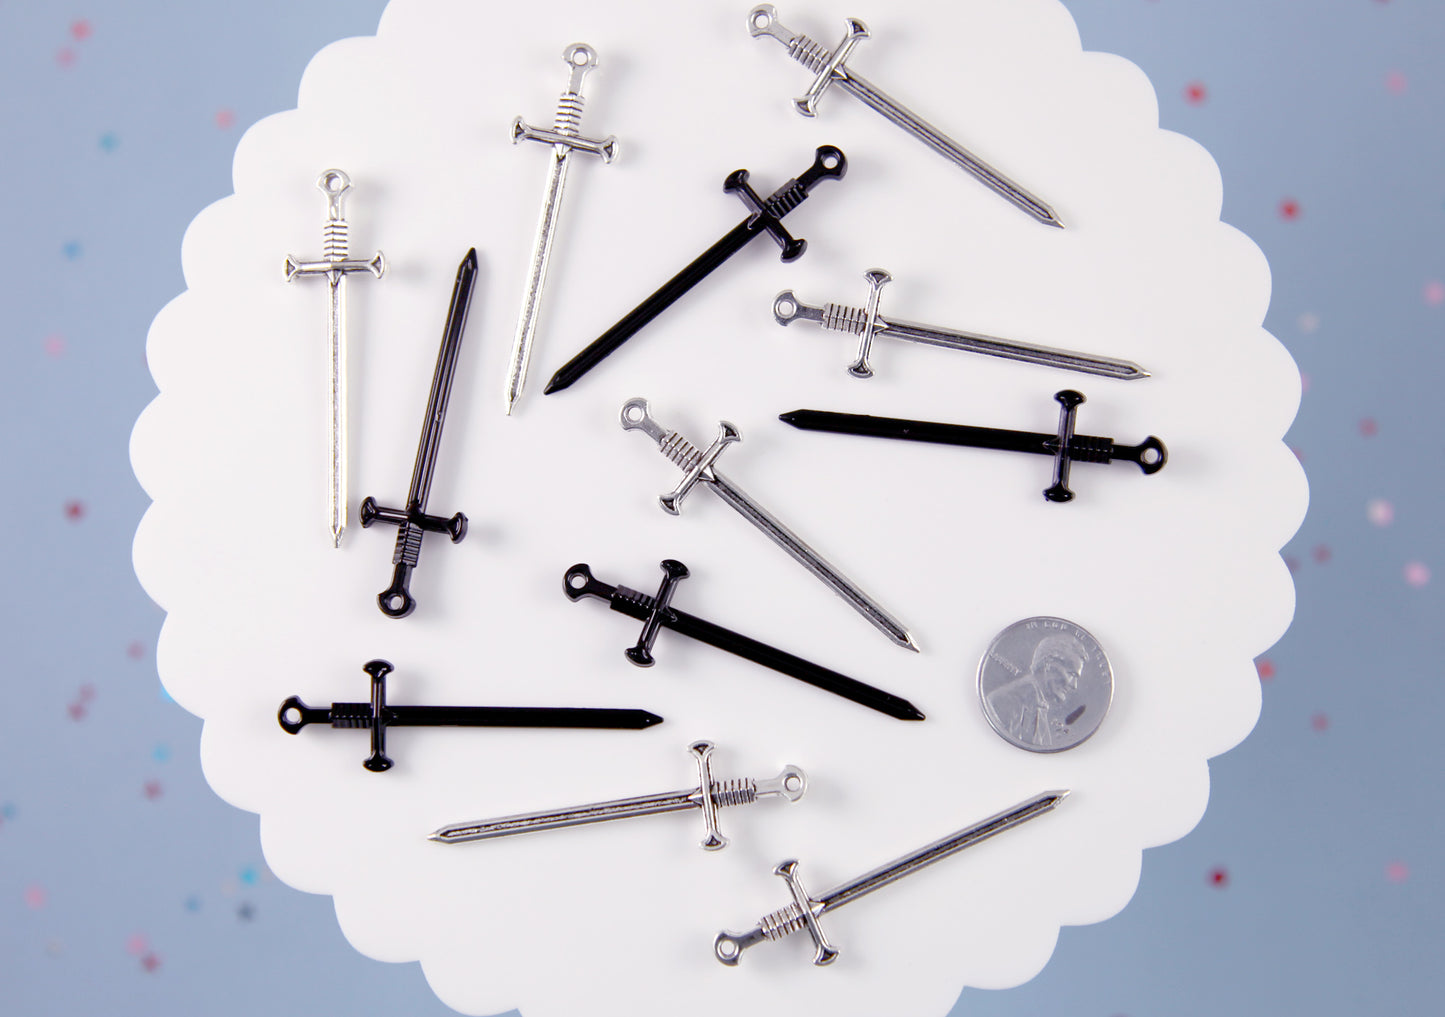 Sword Charms - 54mm Metal Classic Sword Charm or Pendant - Easy to Make into Earrings - 8 pc set